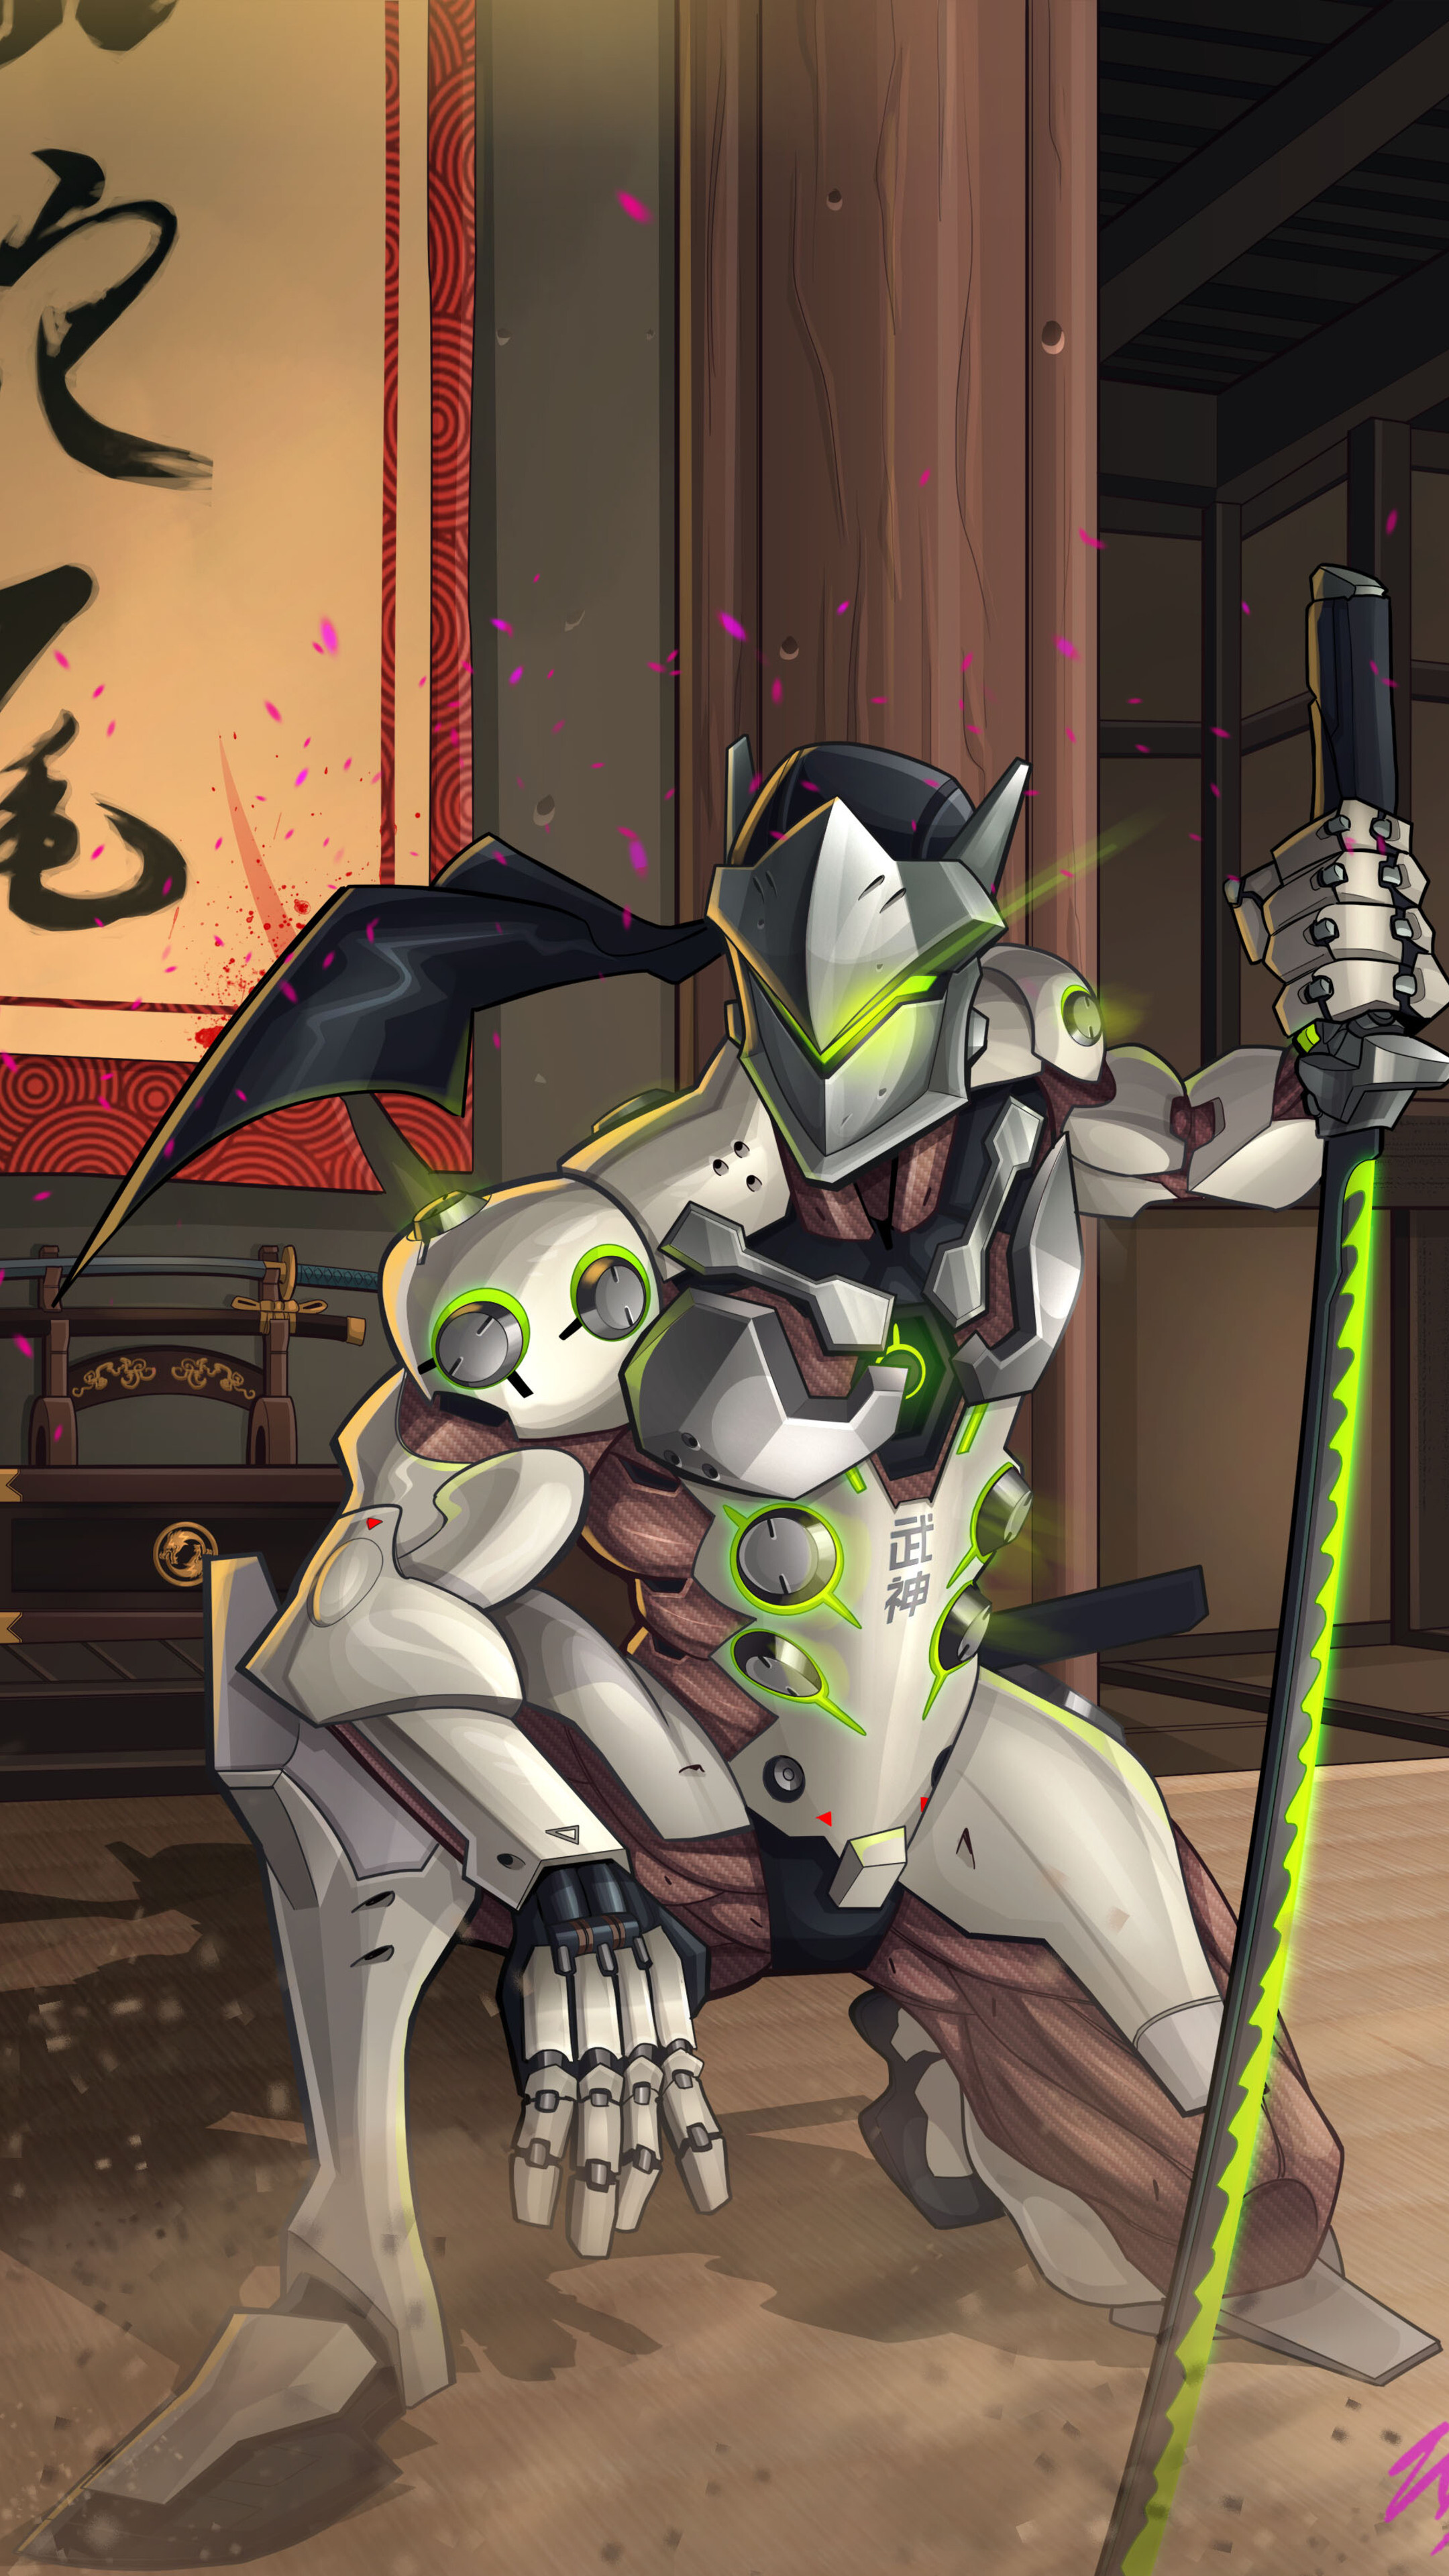 Genji: Overwatch, Swift Strike is useful as a way of traveling around the map as well as an escape method. 2160x3840 4K Background.